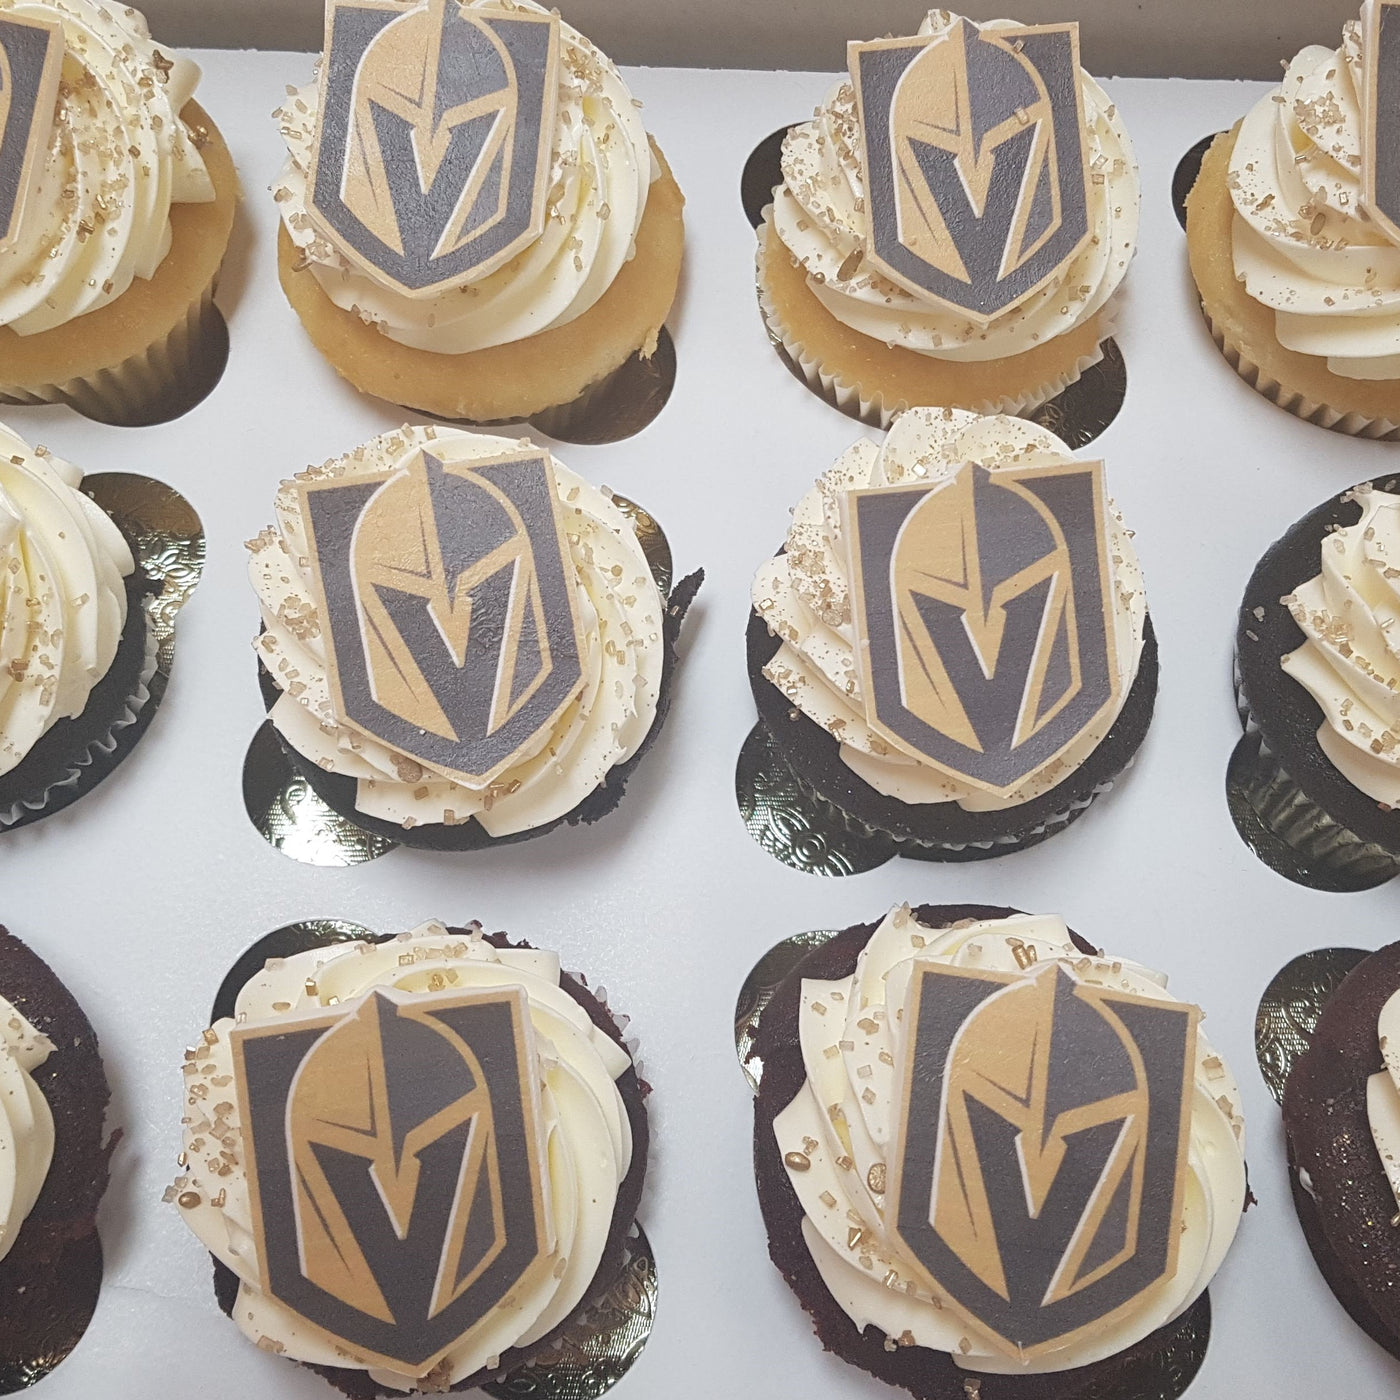 Golden knights party, football party, hockey party, super bowl party, stanley cup party